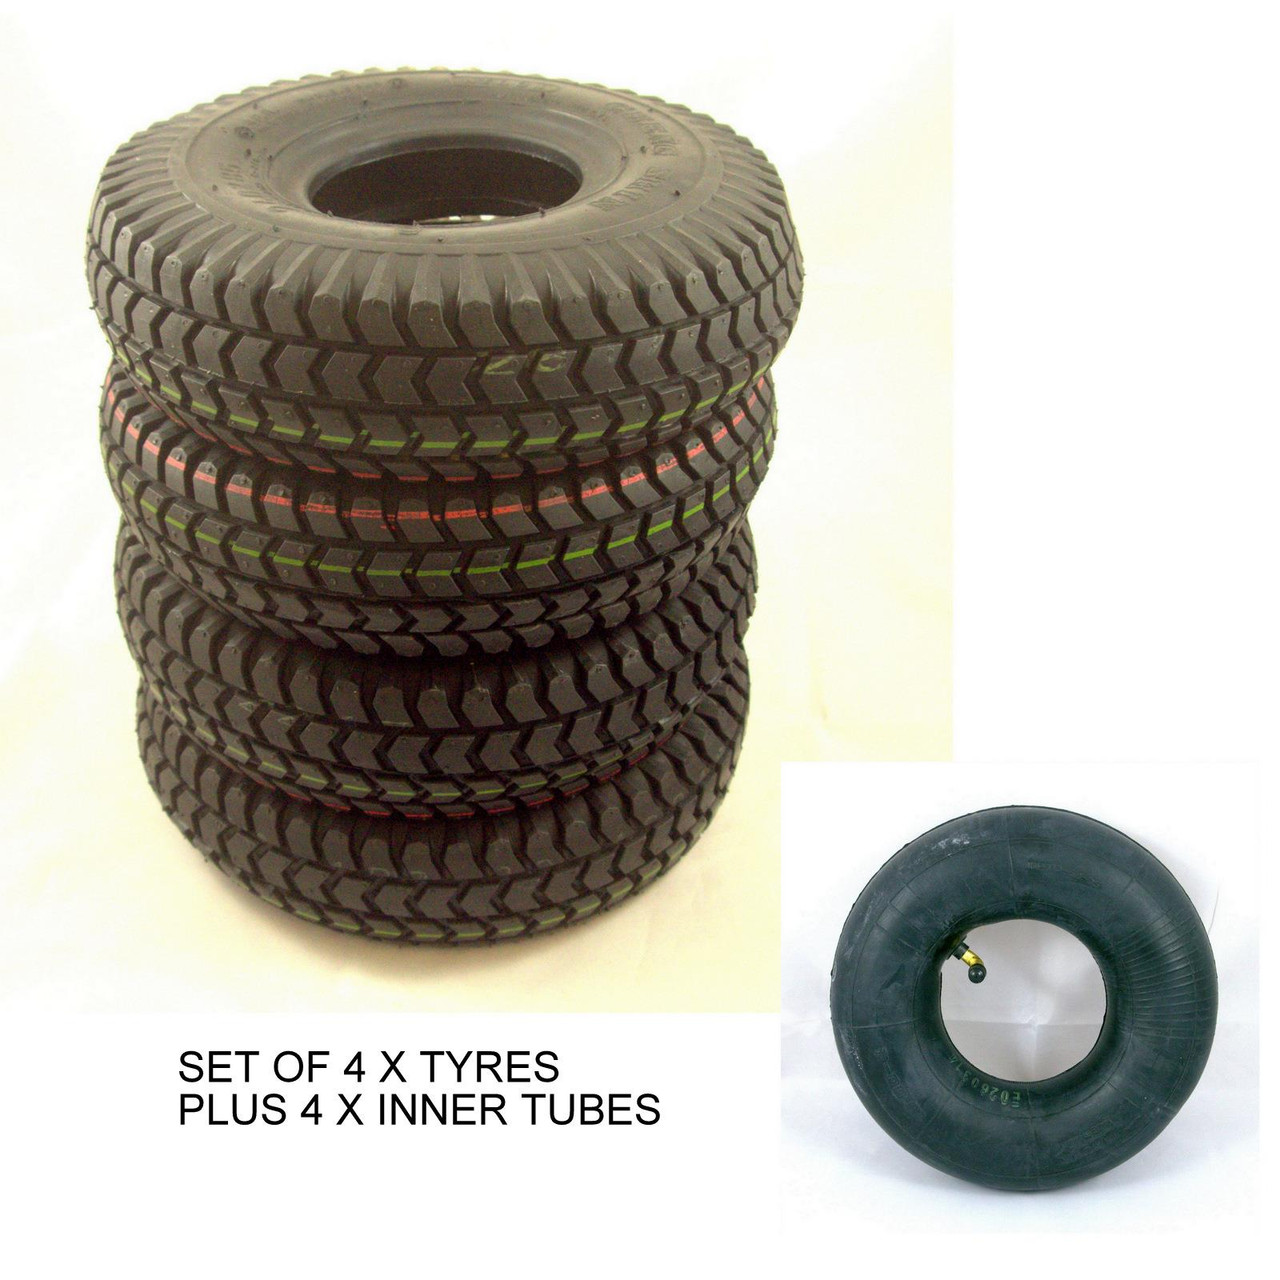 Tyre 3.00-4 Pneumatic Mobility Scooter Block Tread 300x4 3.00x4